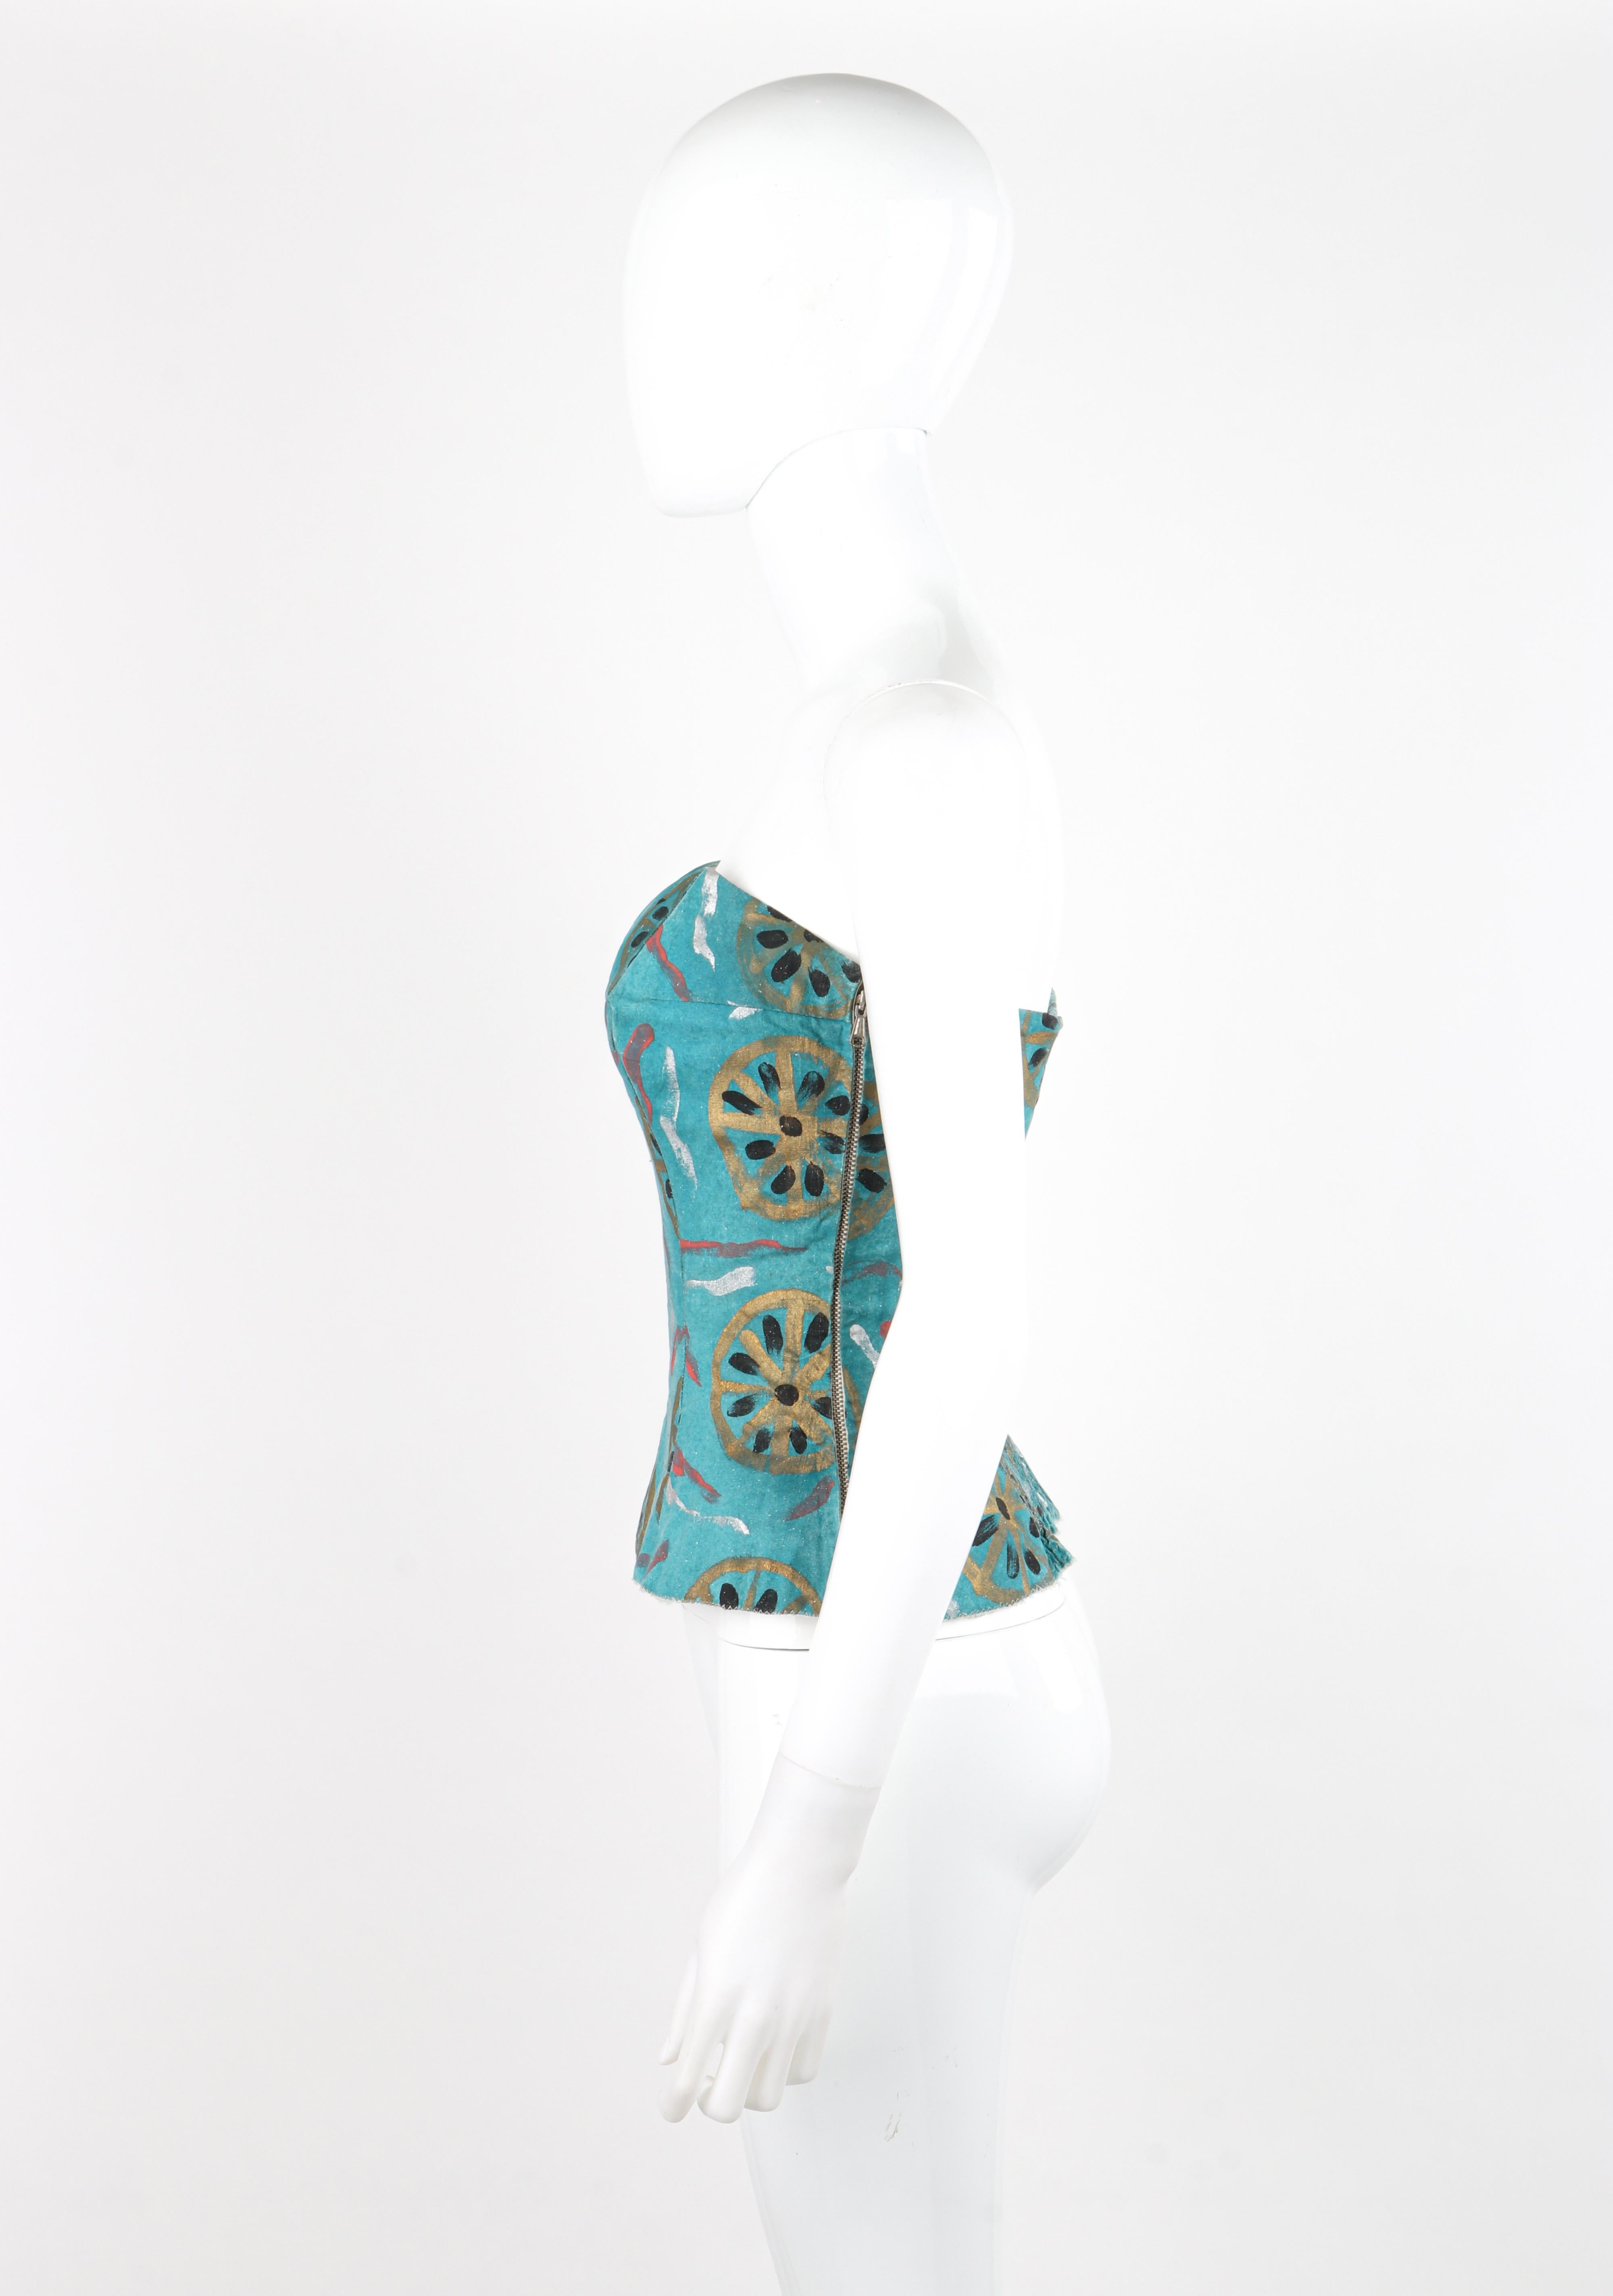 EMILIO PUCCI c.1954 Vtg Teal Cotton Fitted Hand Painted Bustier Sun Top RARE For Sale 5